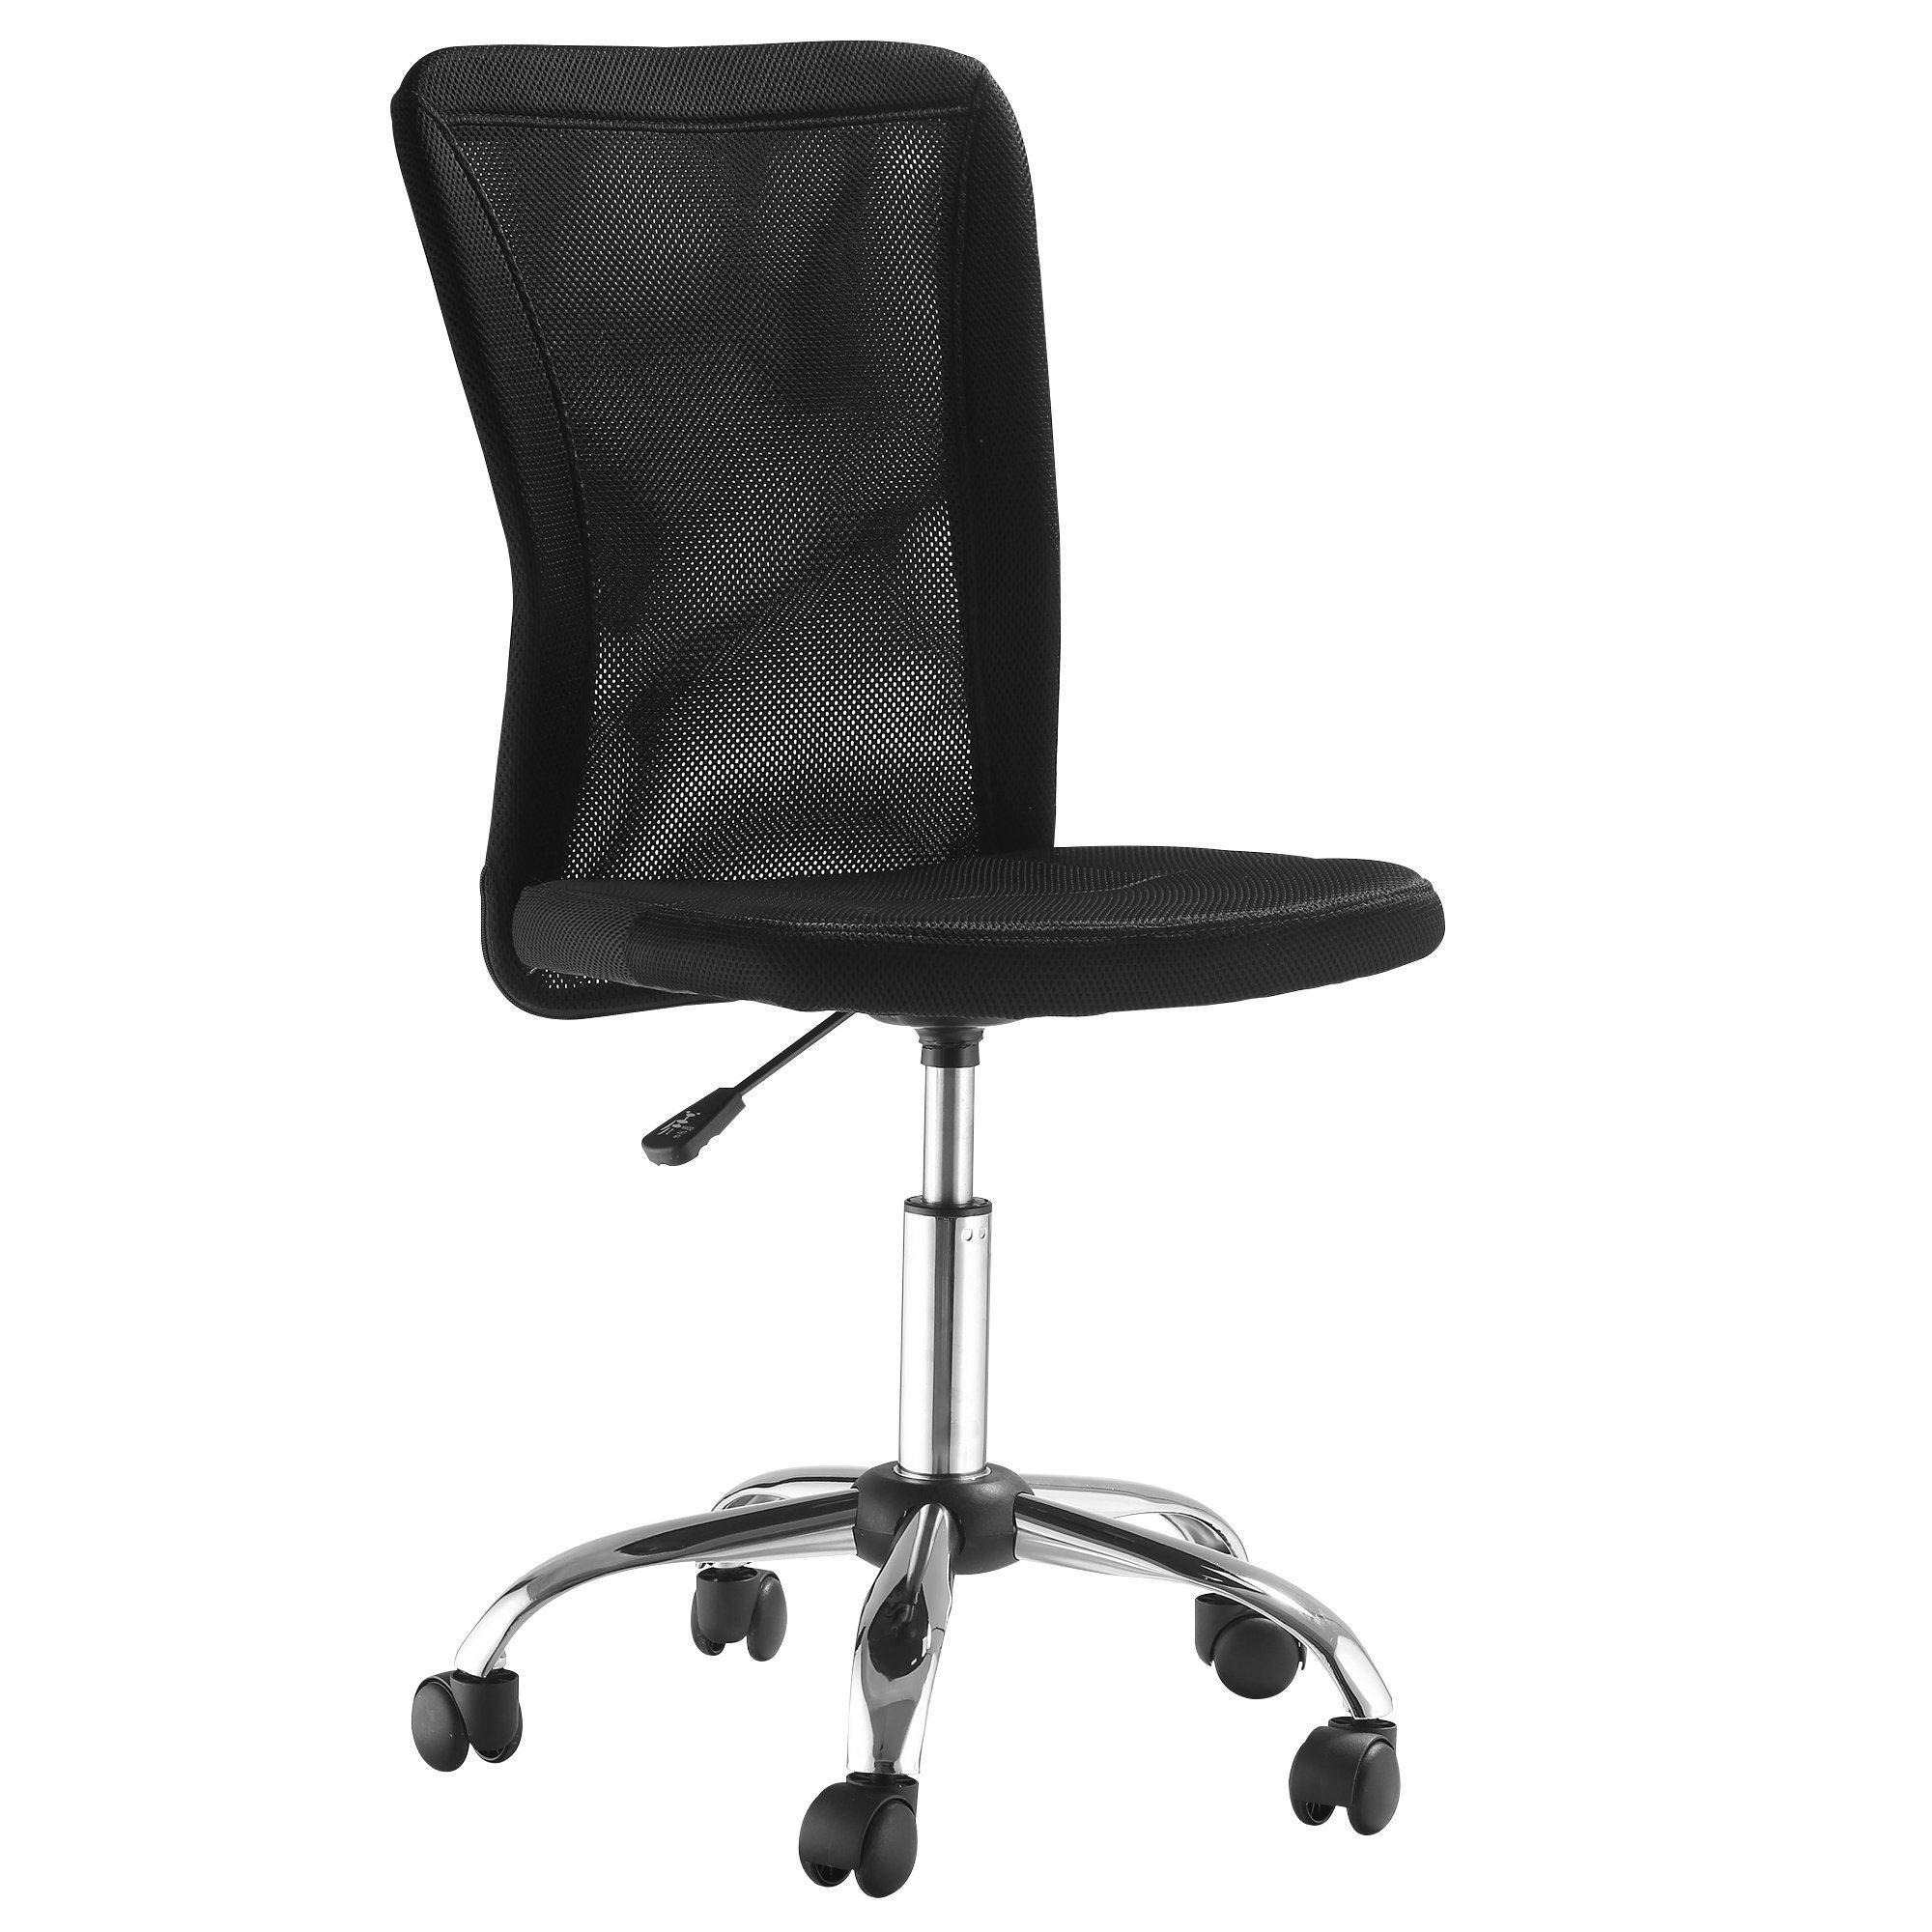 Armless Office Chair Ergonomic Padded Height Adjustable Mesh Back - image 1